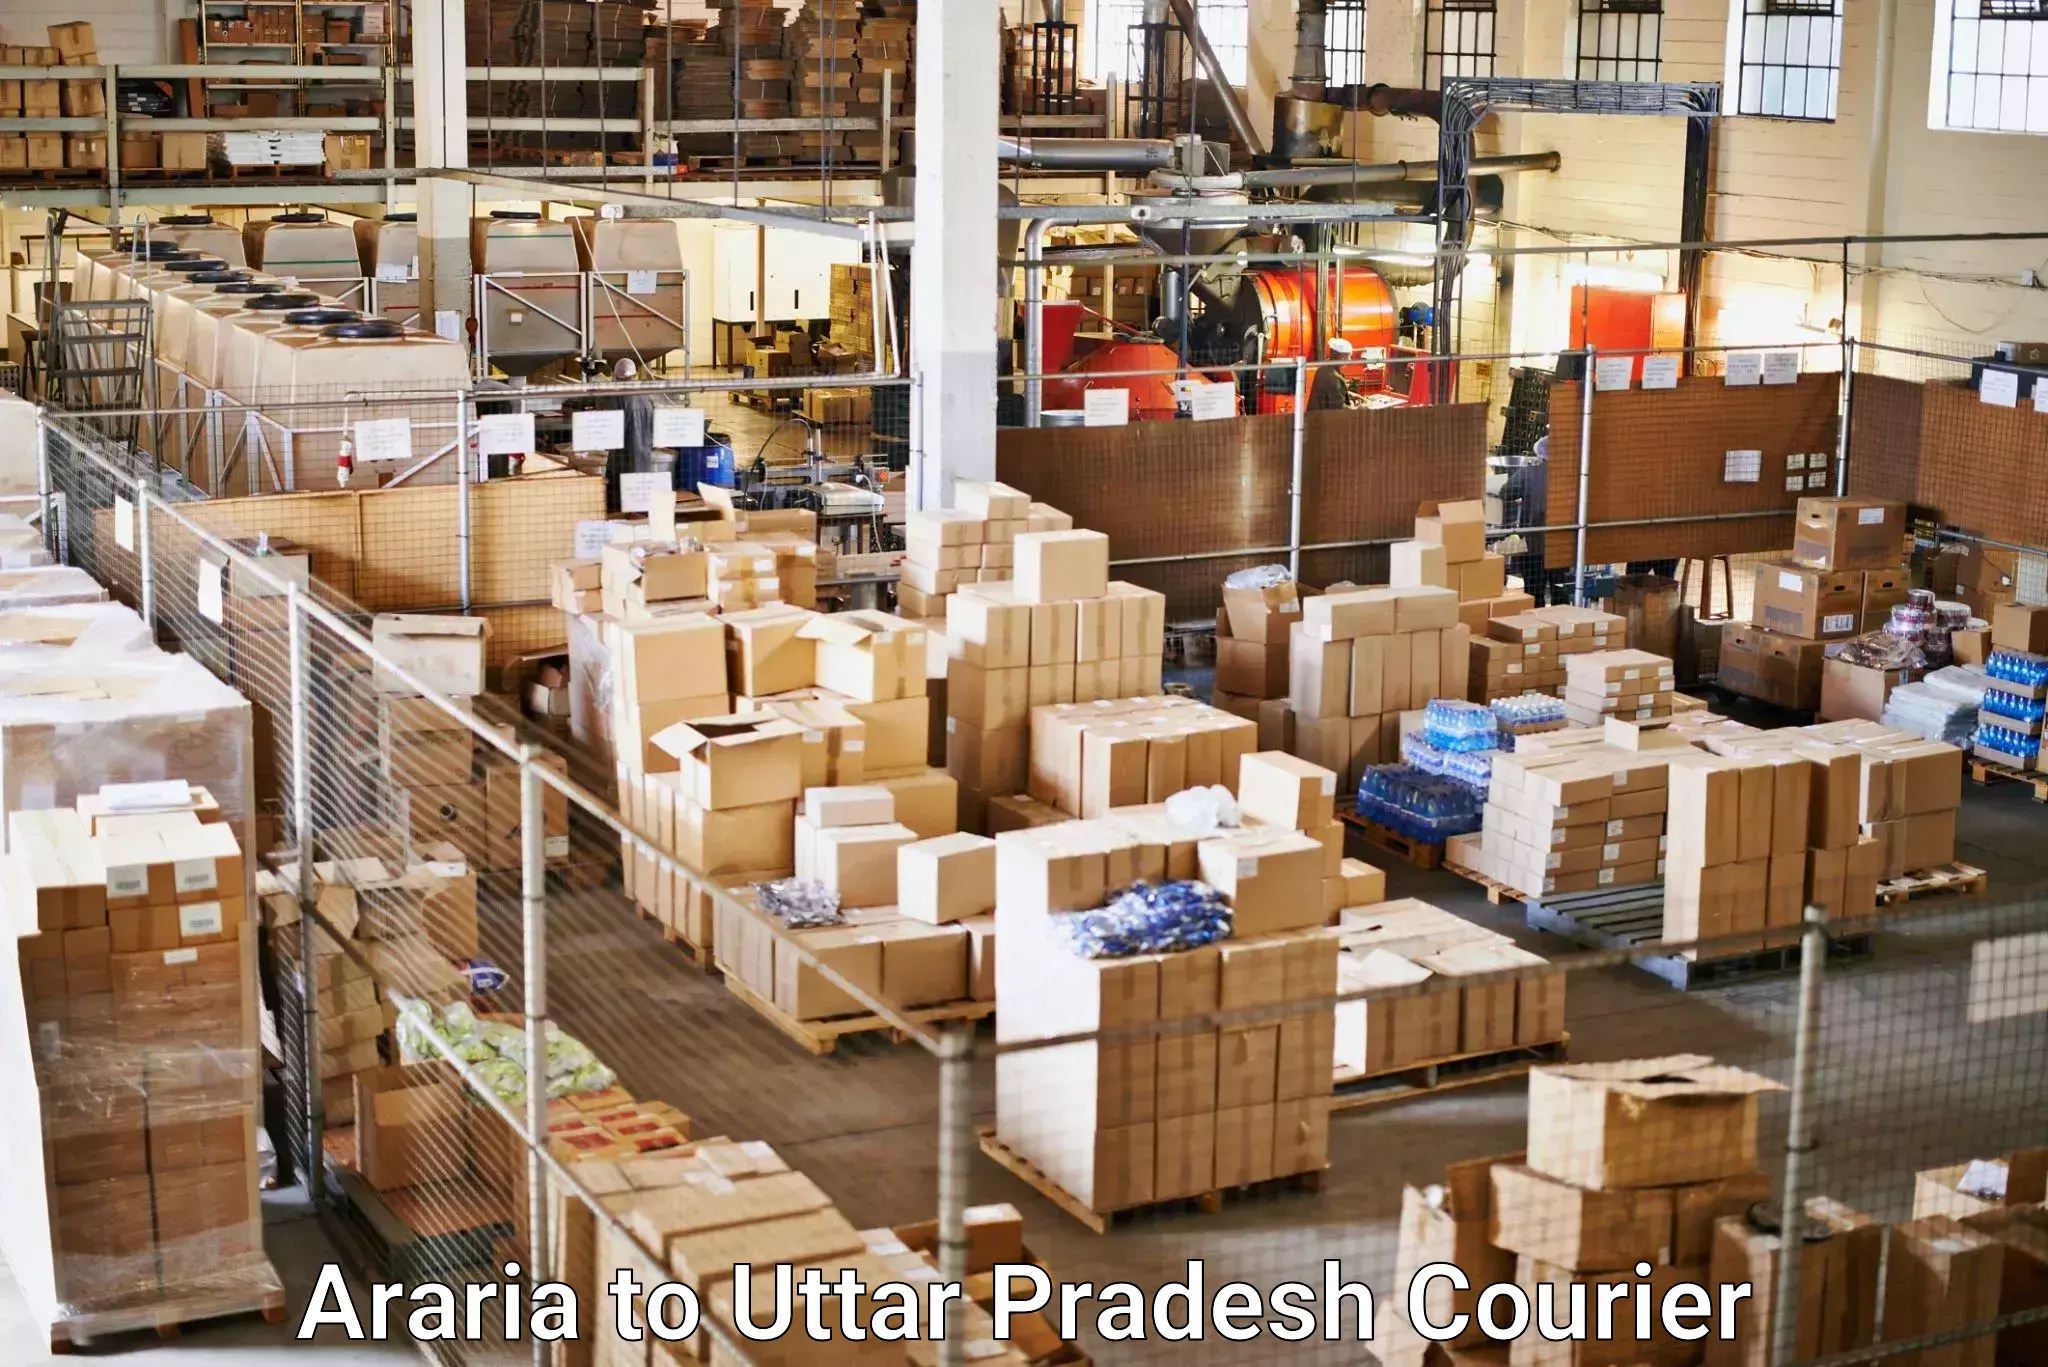 Cost-effective freight solutions Araria to Aligarh Muslim University